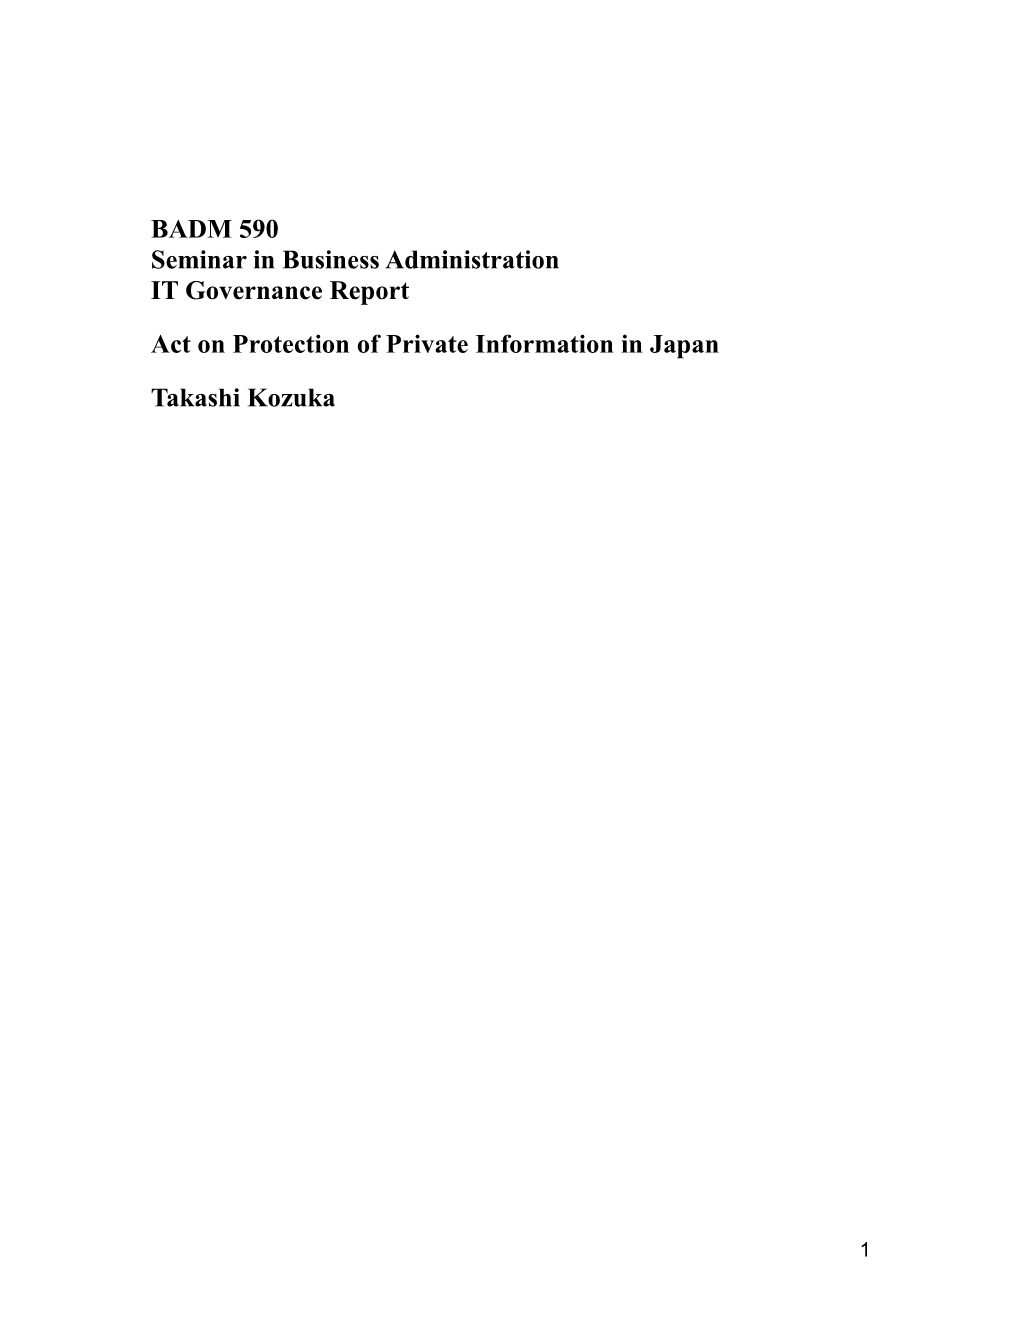 Act on Protection of Private Information in Japan